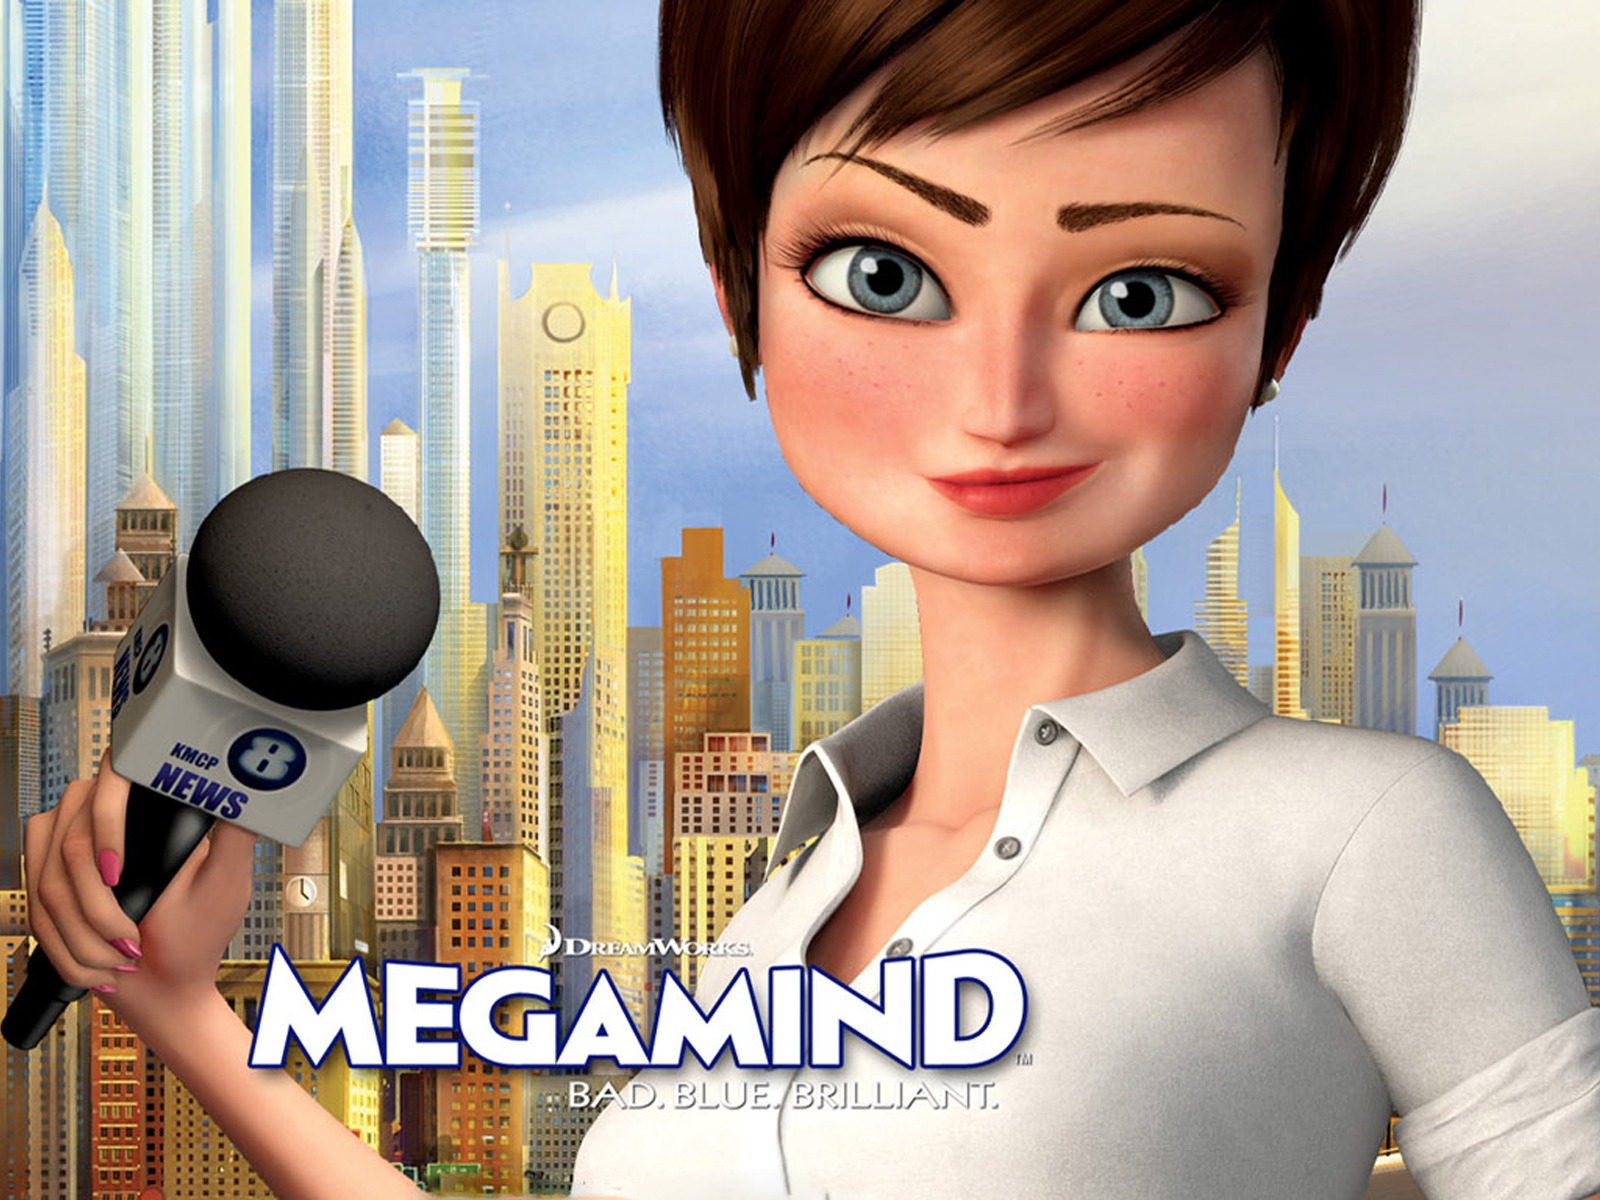 Megamind Roxanne Ritchie for 1600 x 1200 resolution